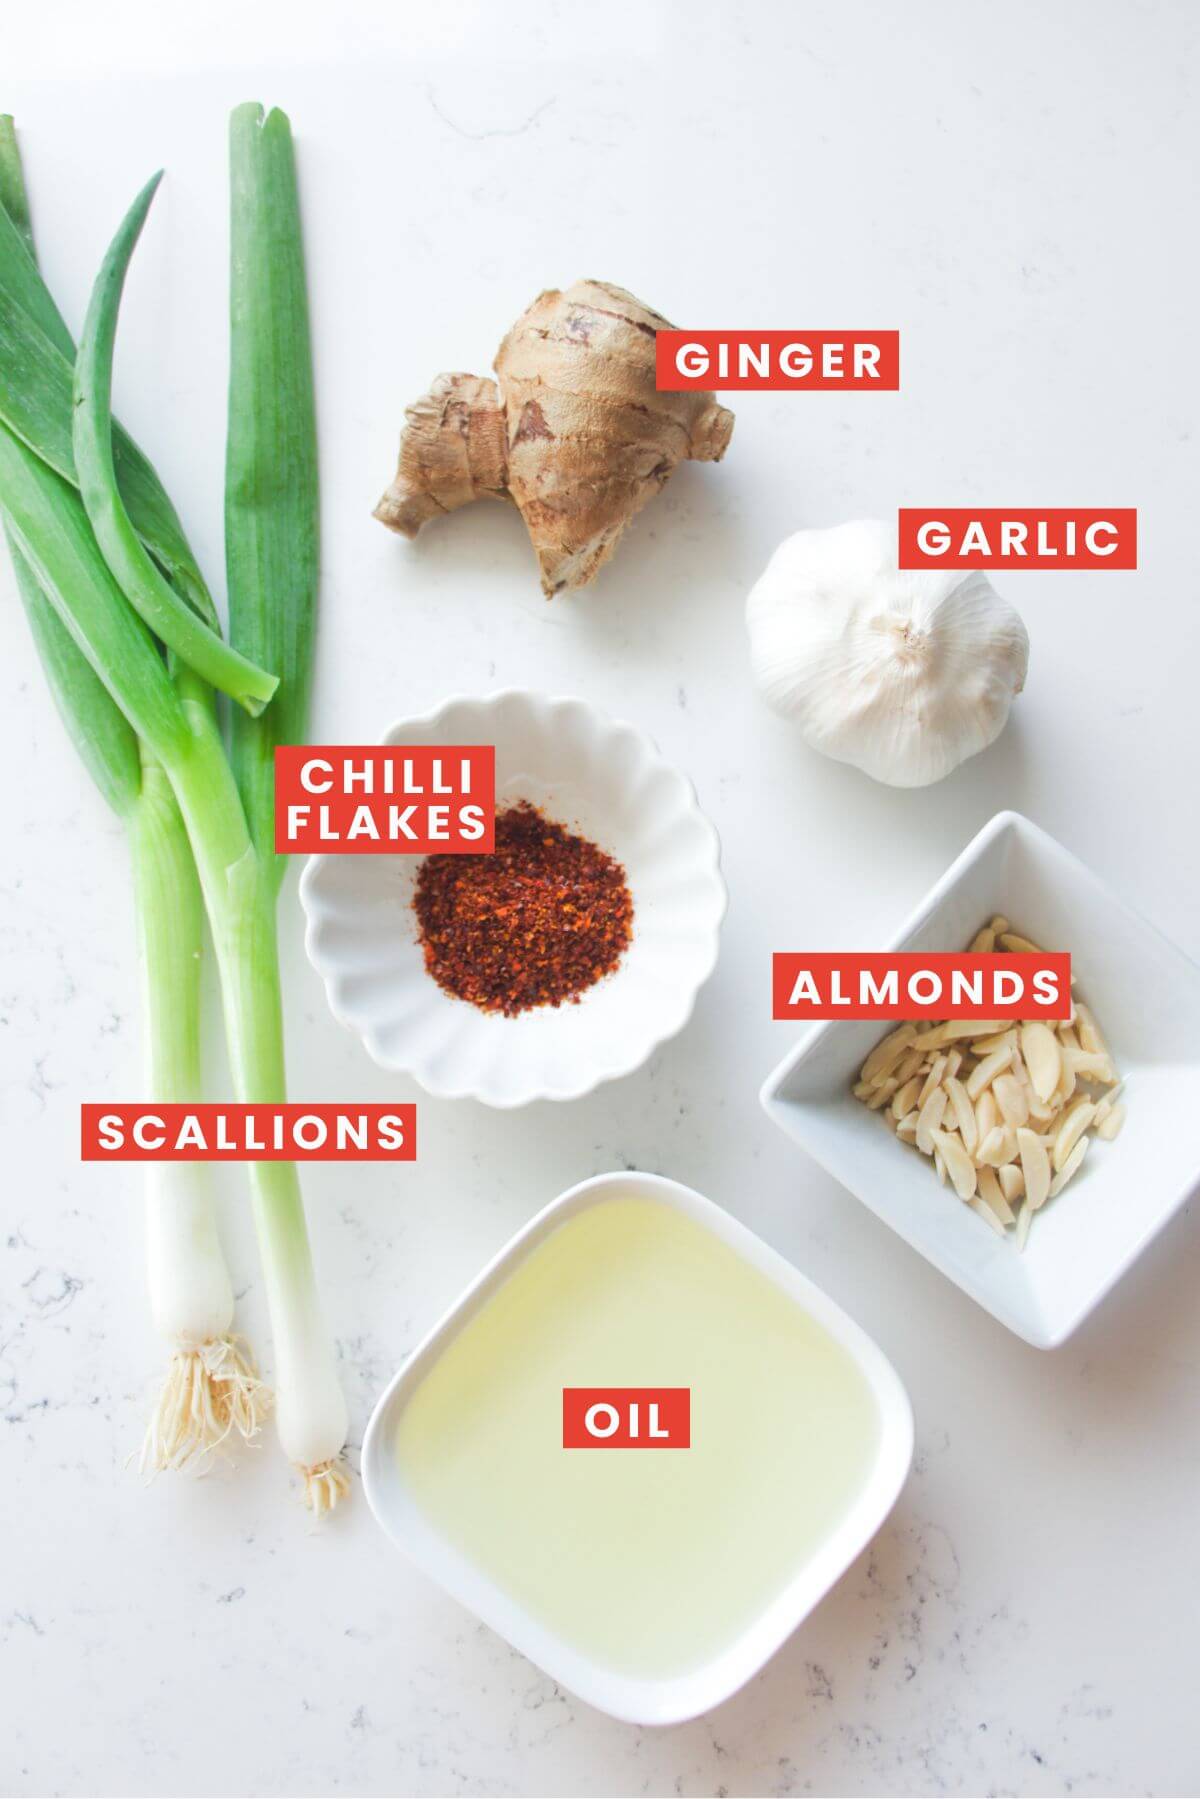 Ingredients for sizzling oil yogurt dip laid out and labelled.